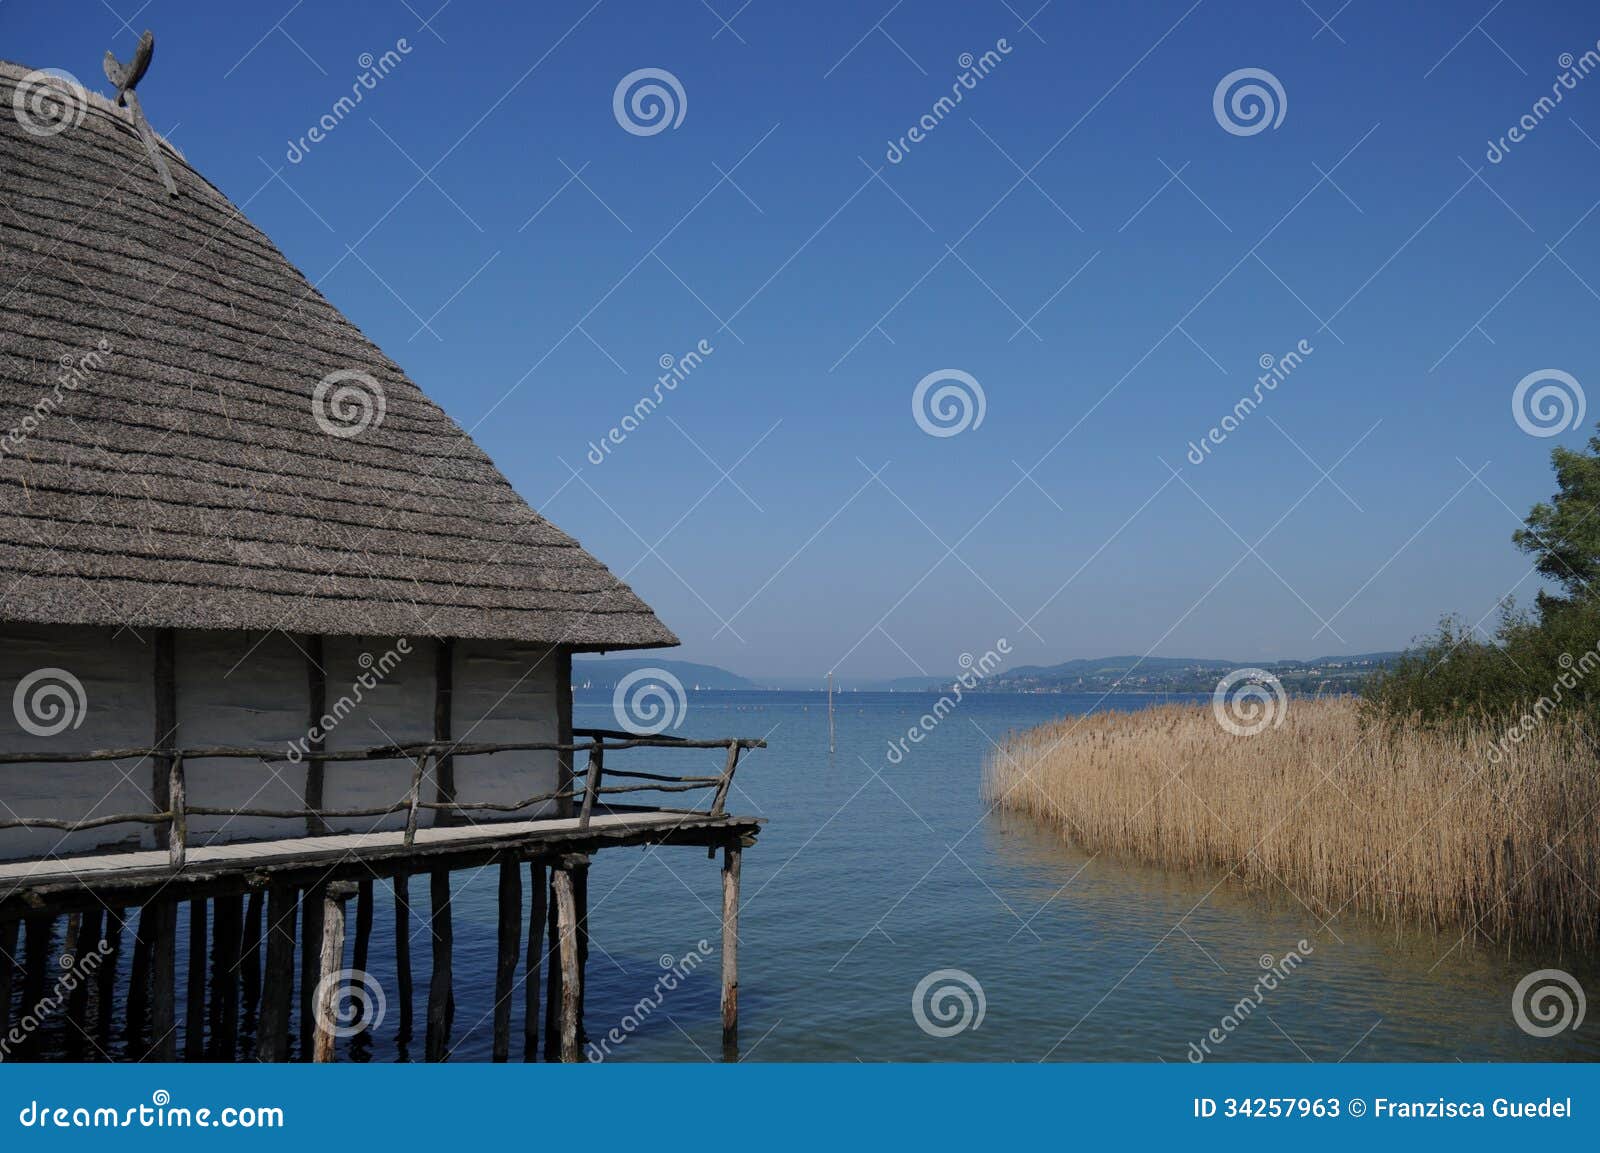 Stilt House / Pile Dwelling / Palafitte. Stilt houses also known as pile dwellings or palafitte were common buildings during the neolithic and bronze age. A truly natural and rural construction located at the shores of the sea.